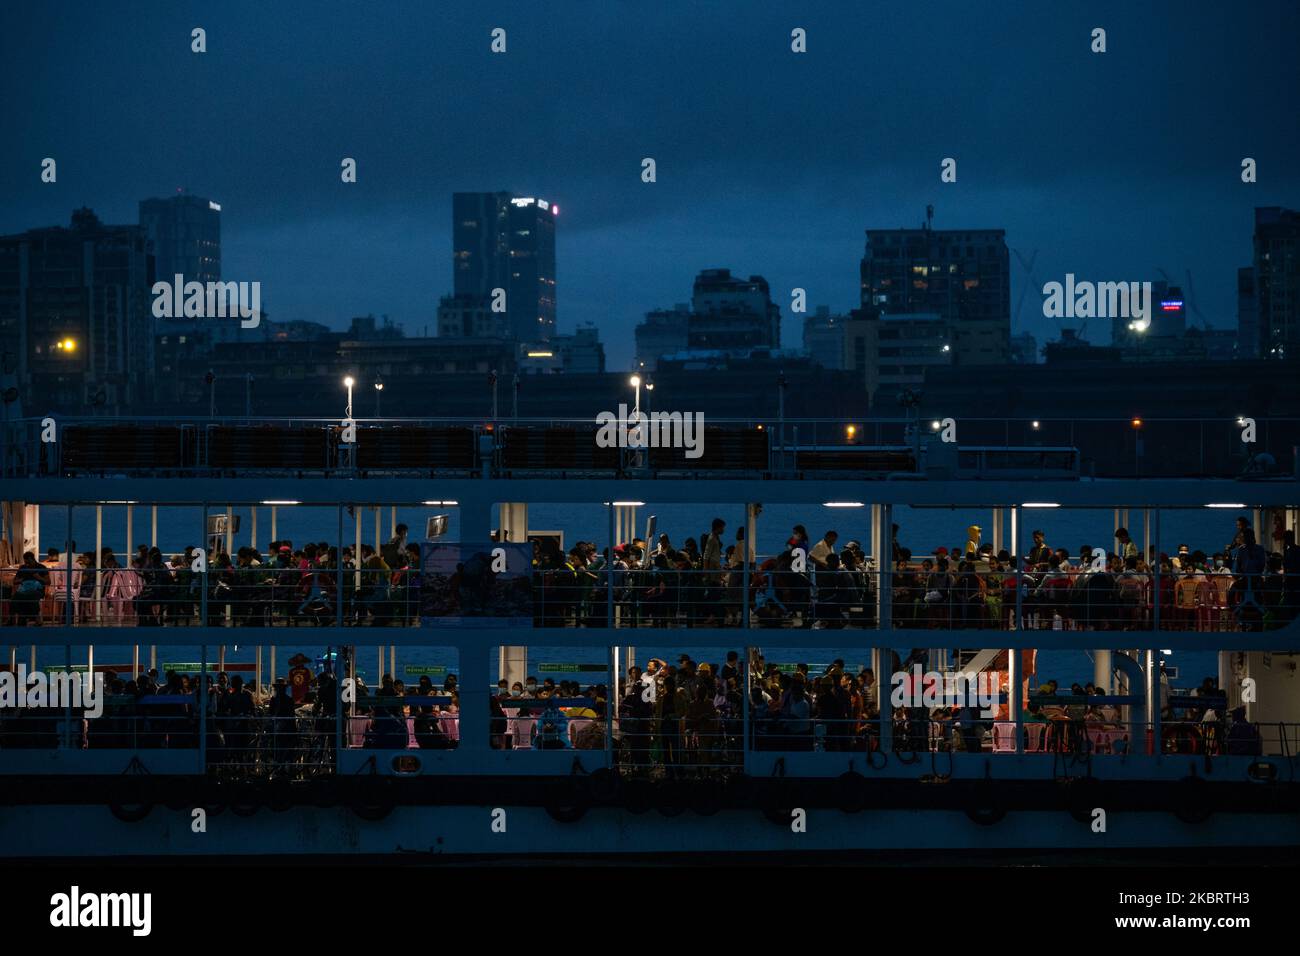 Commuters take a ferry to cross Yangon river during a heavy rainfall in Yangon on June 29, 2020. (Photo by Shwe Paw Mya Tin/NurPhoto) Stock Photo